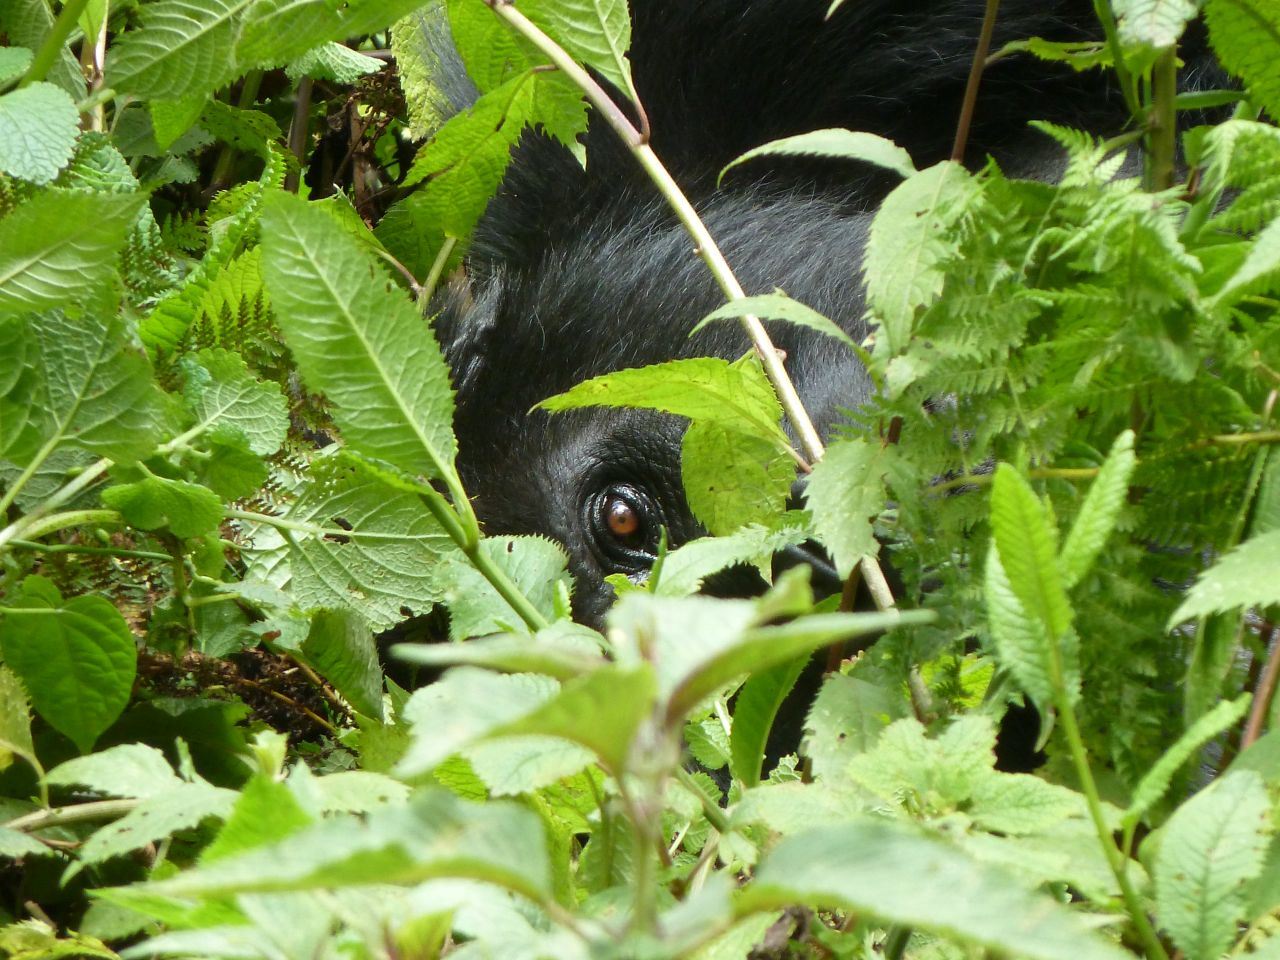 A gorilla concealed beneath the foliage. Mountain gorillas will tolerate humans coming much closer to them than their lowland cousins do.